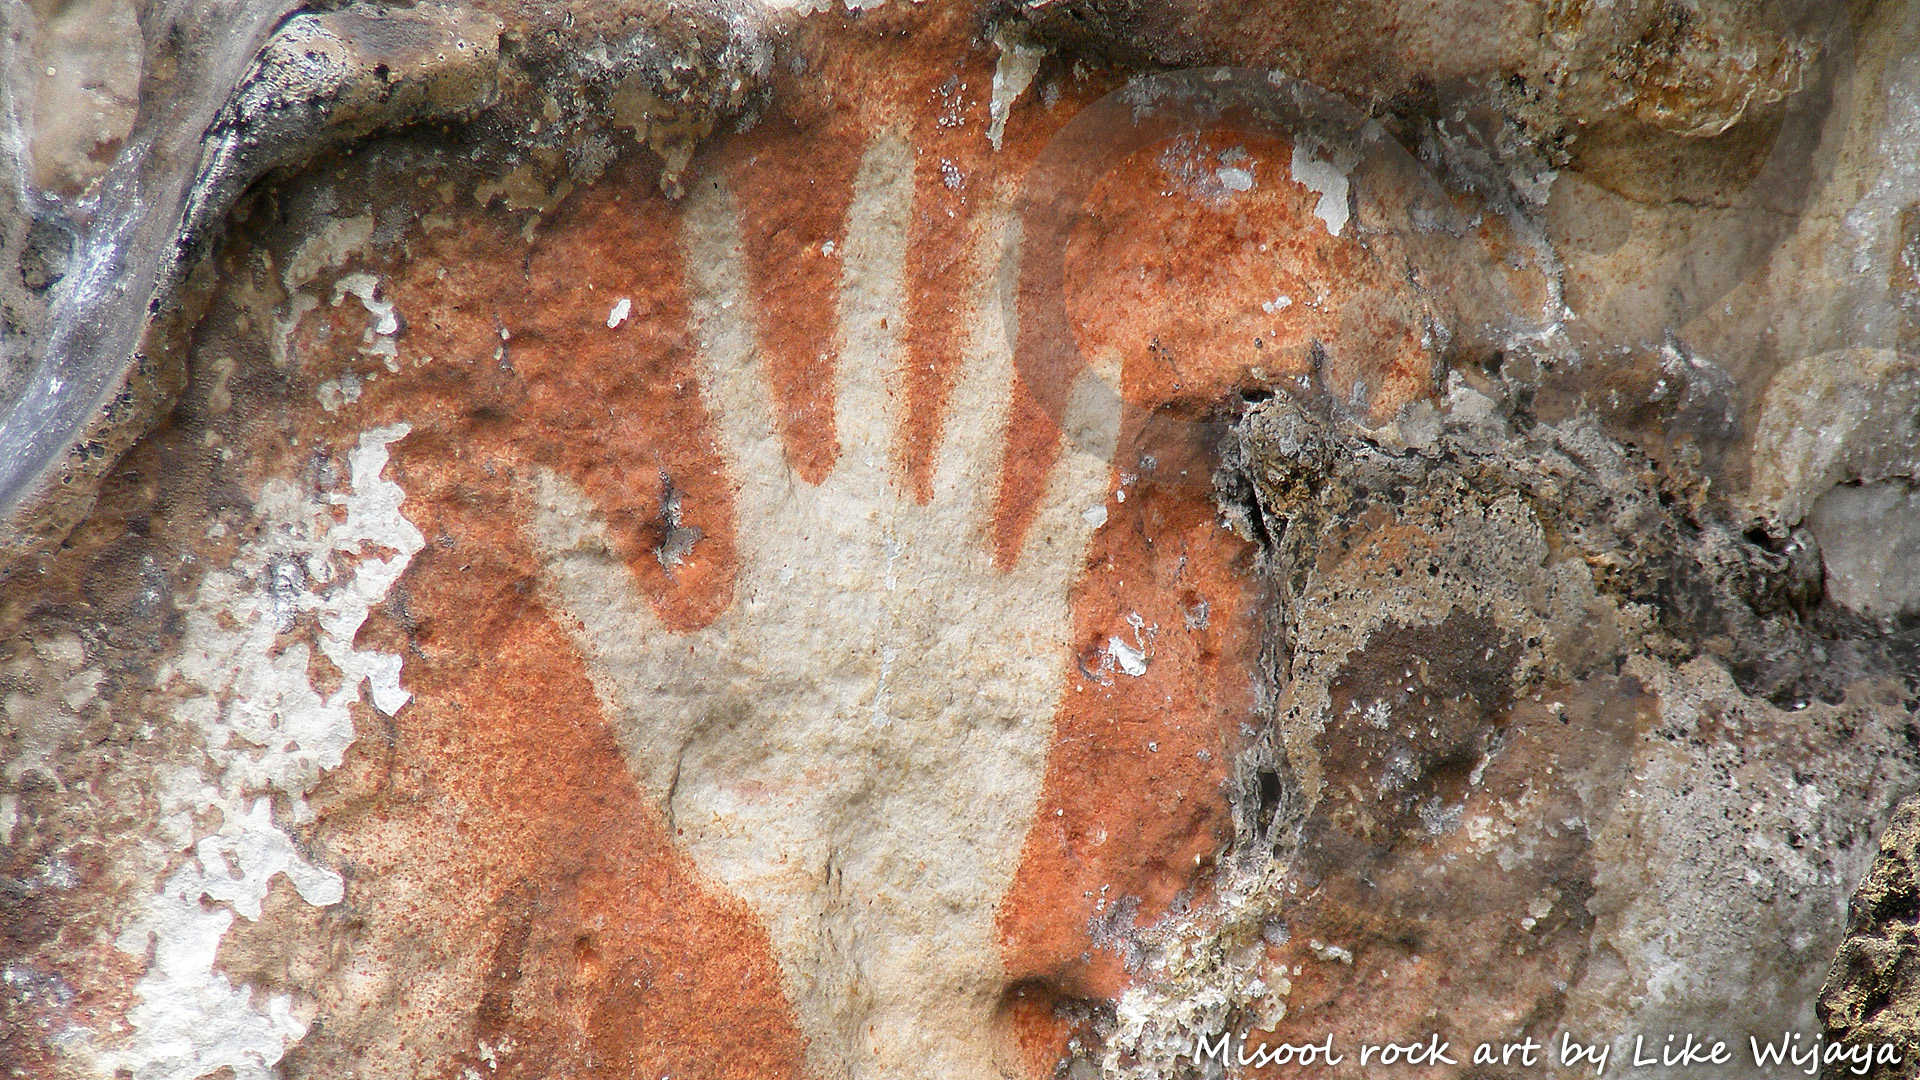 Rock art, including timeless so-called 'stencilled hands', off Misool Island in the fabled Raja Ampat archipelago off New Guinea's western tip, is being associated with the first wave of human expansion into the New Guinea region. Copyright © Like Wijaya